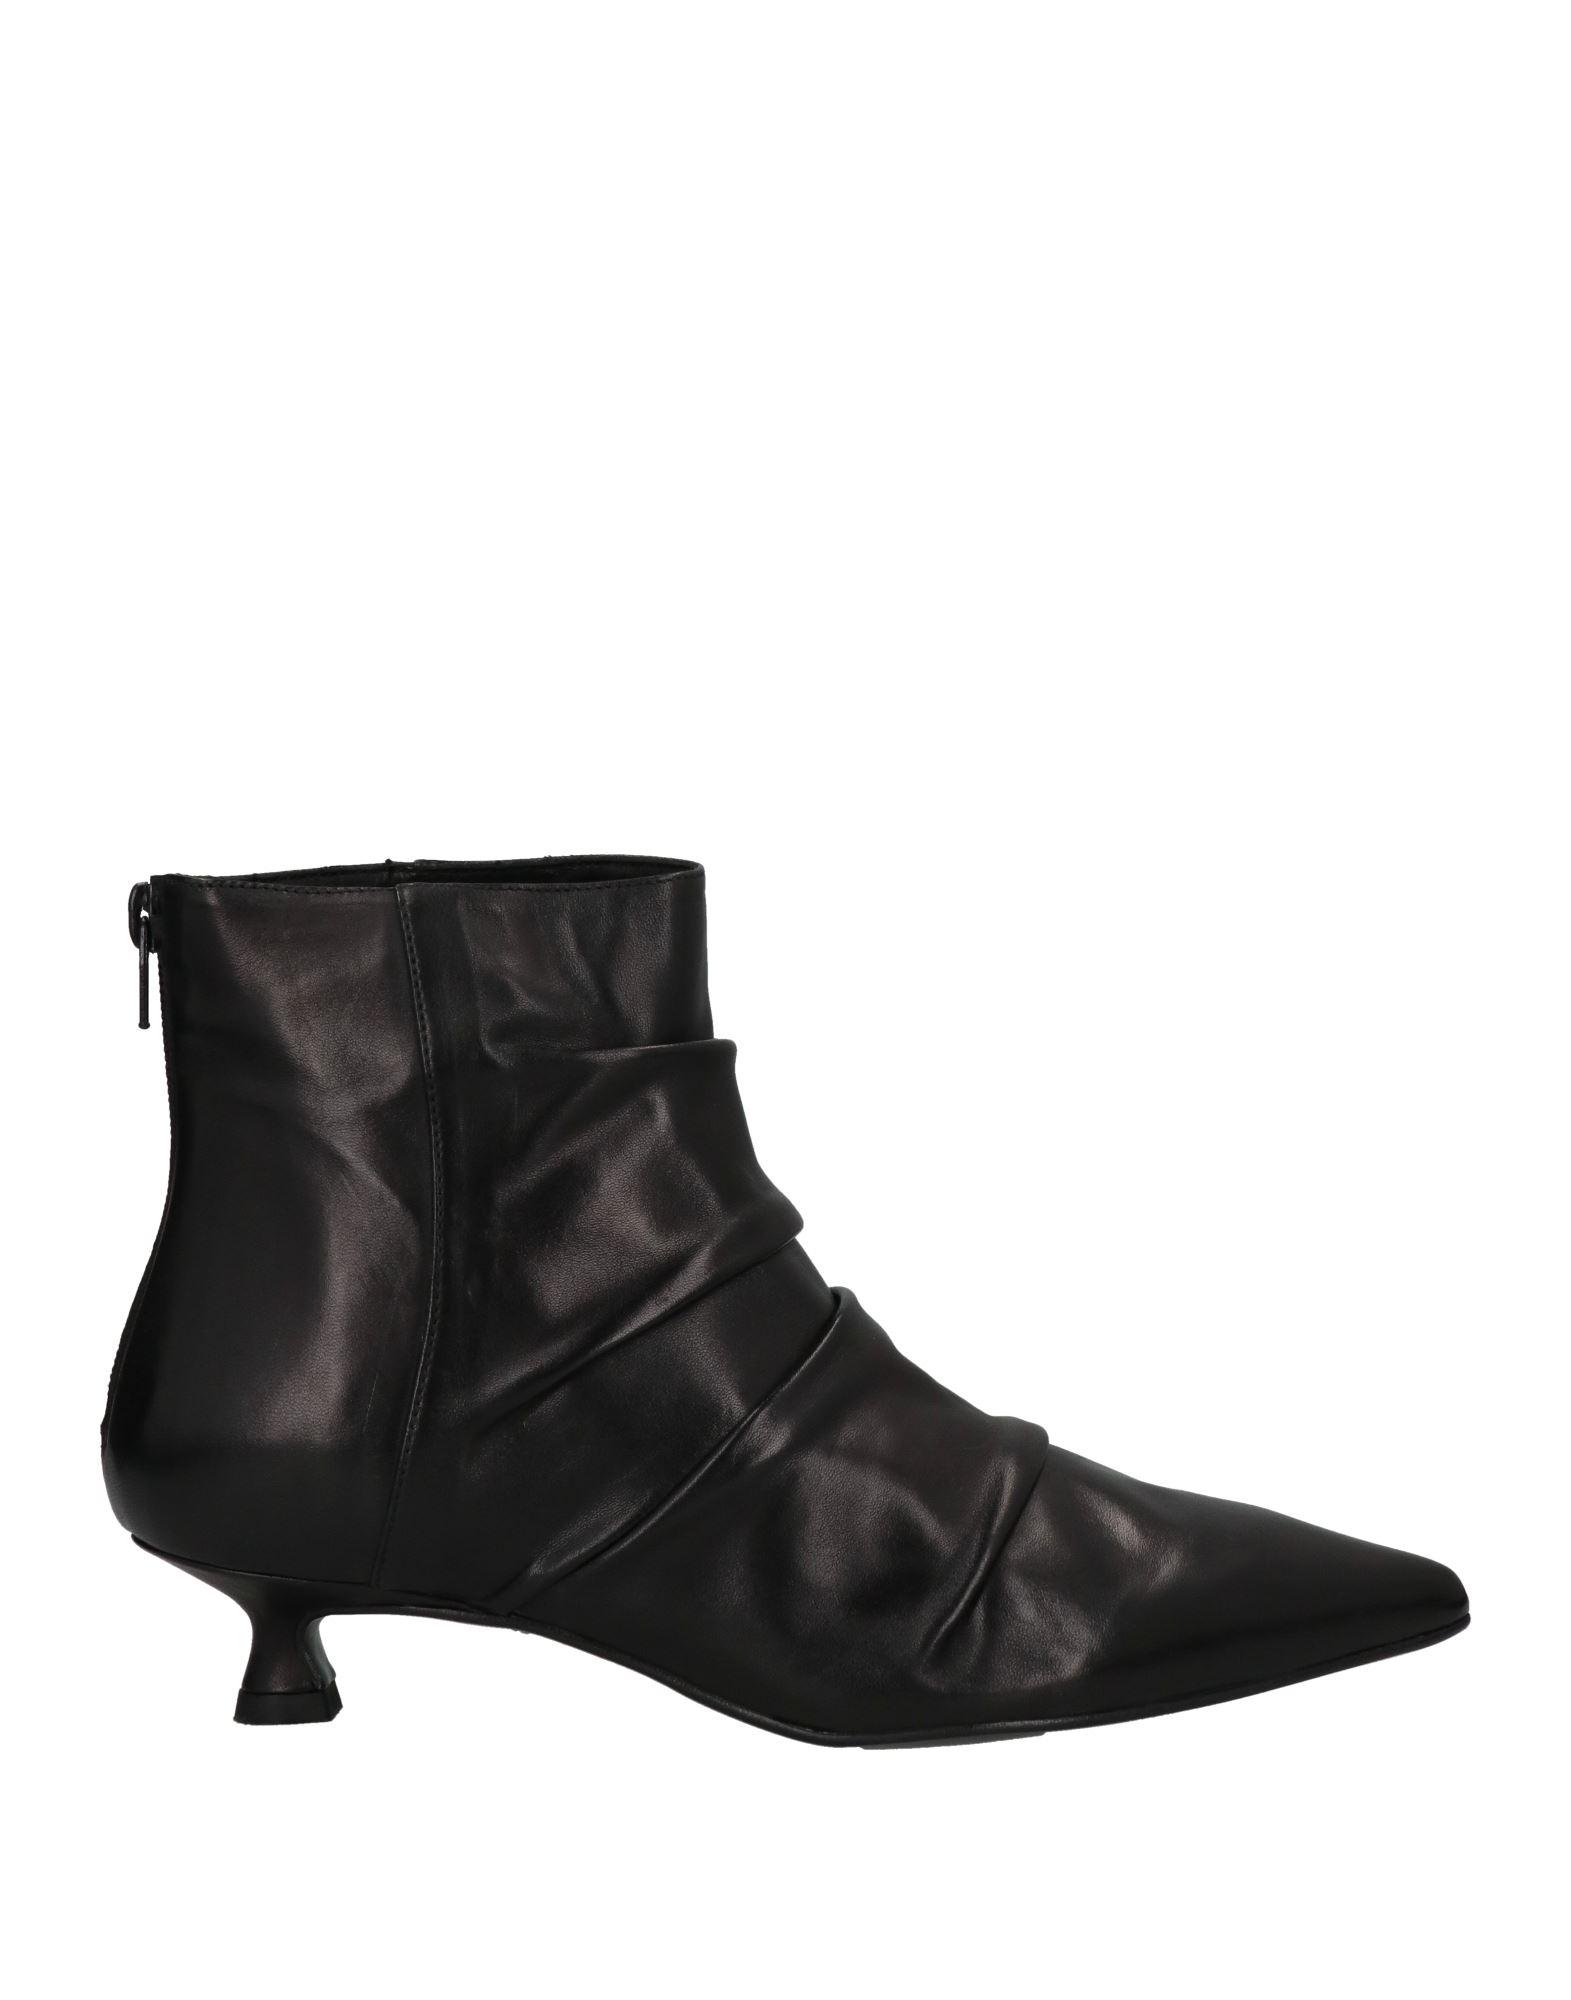 Tosca Blu Ankle Boots in Black | Lyst